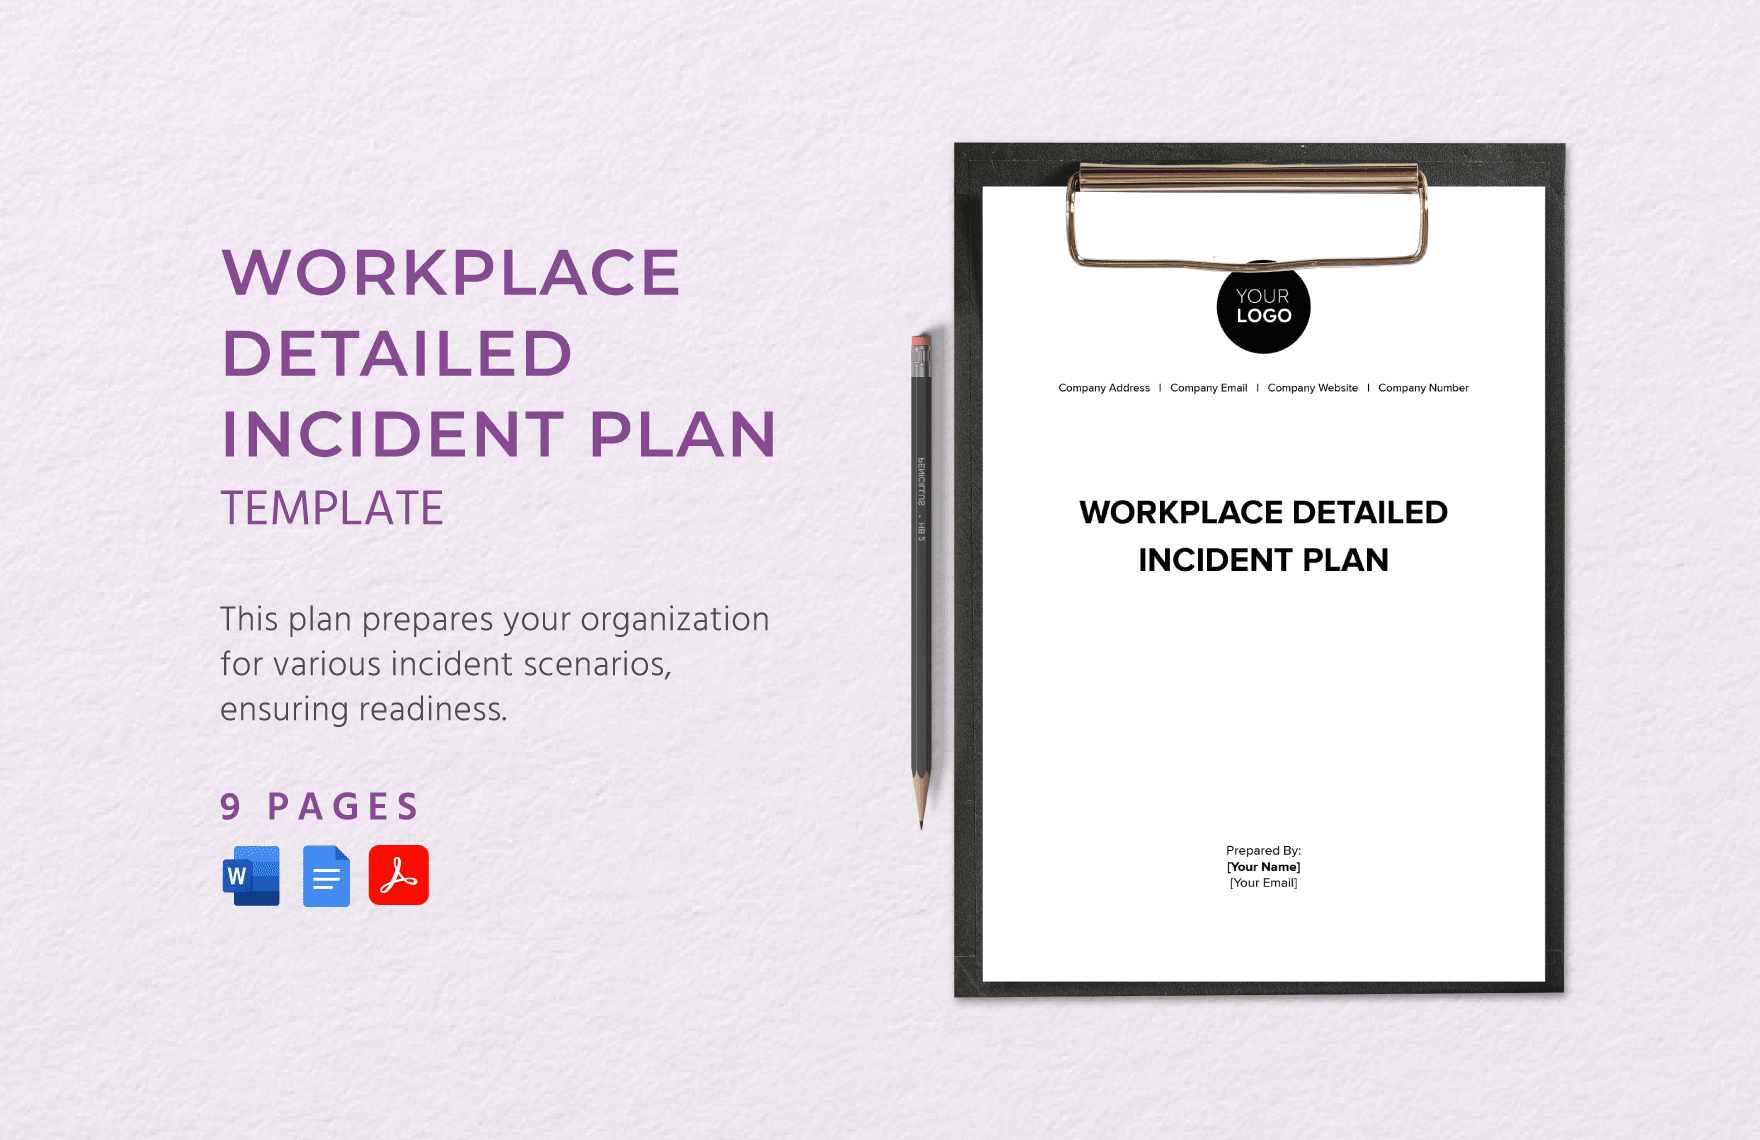 Workplace Detailed Incident Plan Template